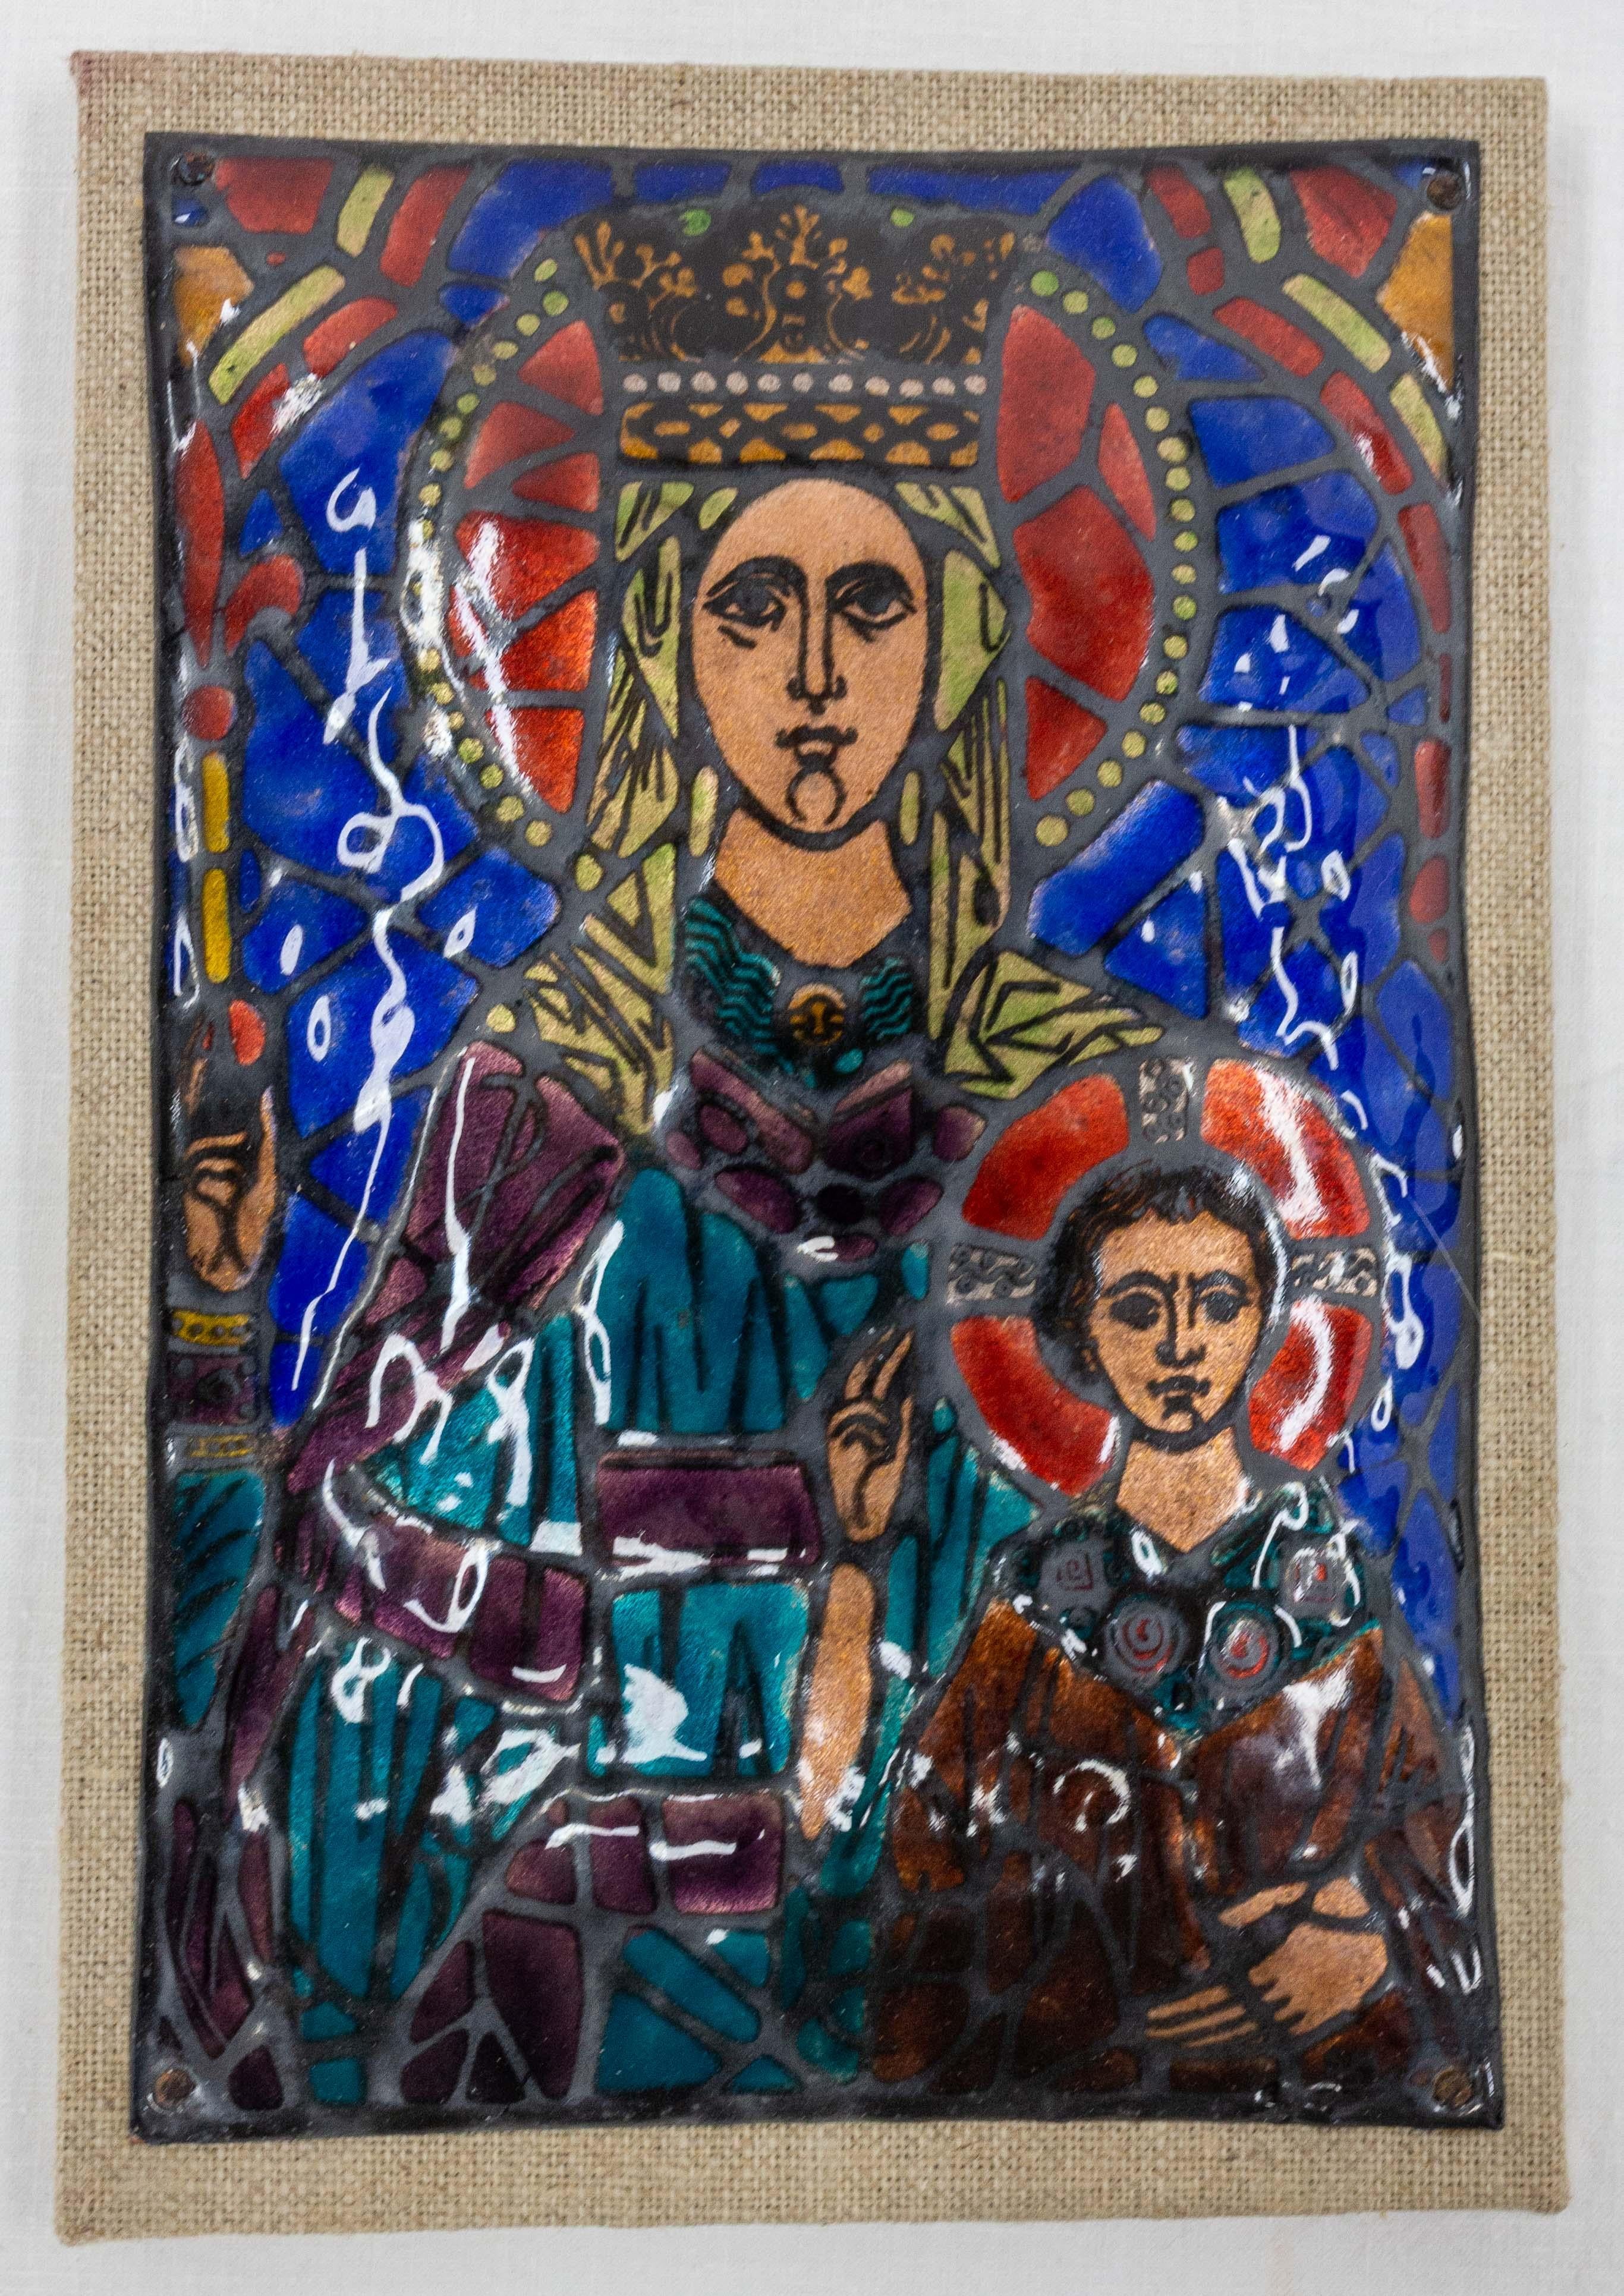 Virgin Mary and Baby Jesus enameled wall plaque.
French, mid-century.
Reproduction from a stained glass window of Reims cathedral (13th century) by the monks of Ligugé Abbey
Good condition with minor signs of age.


